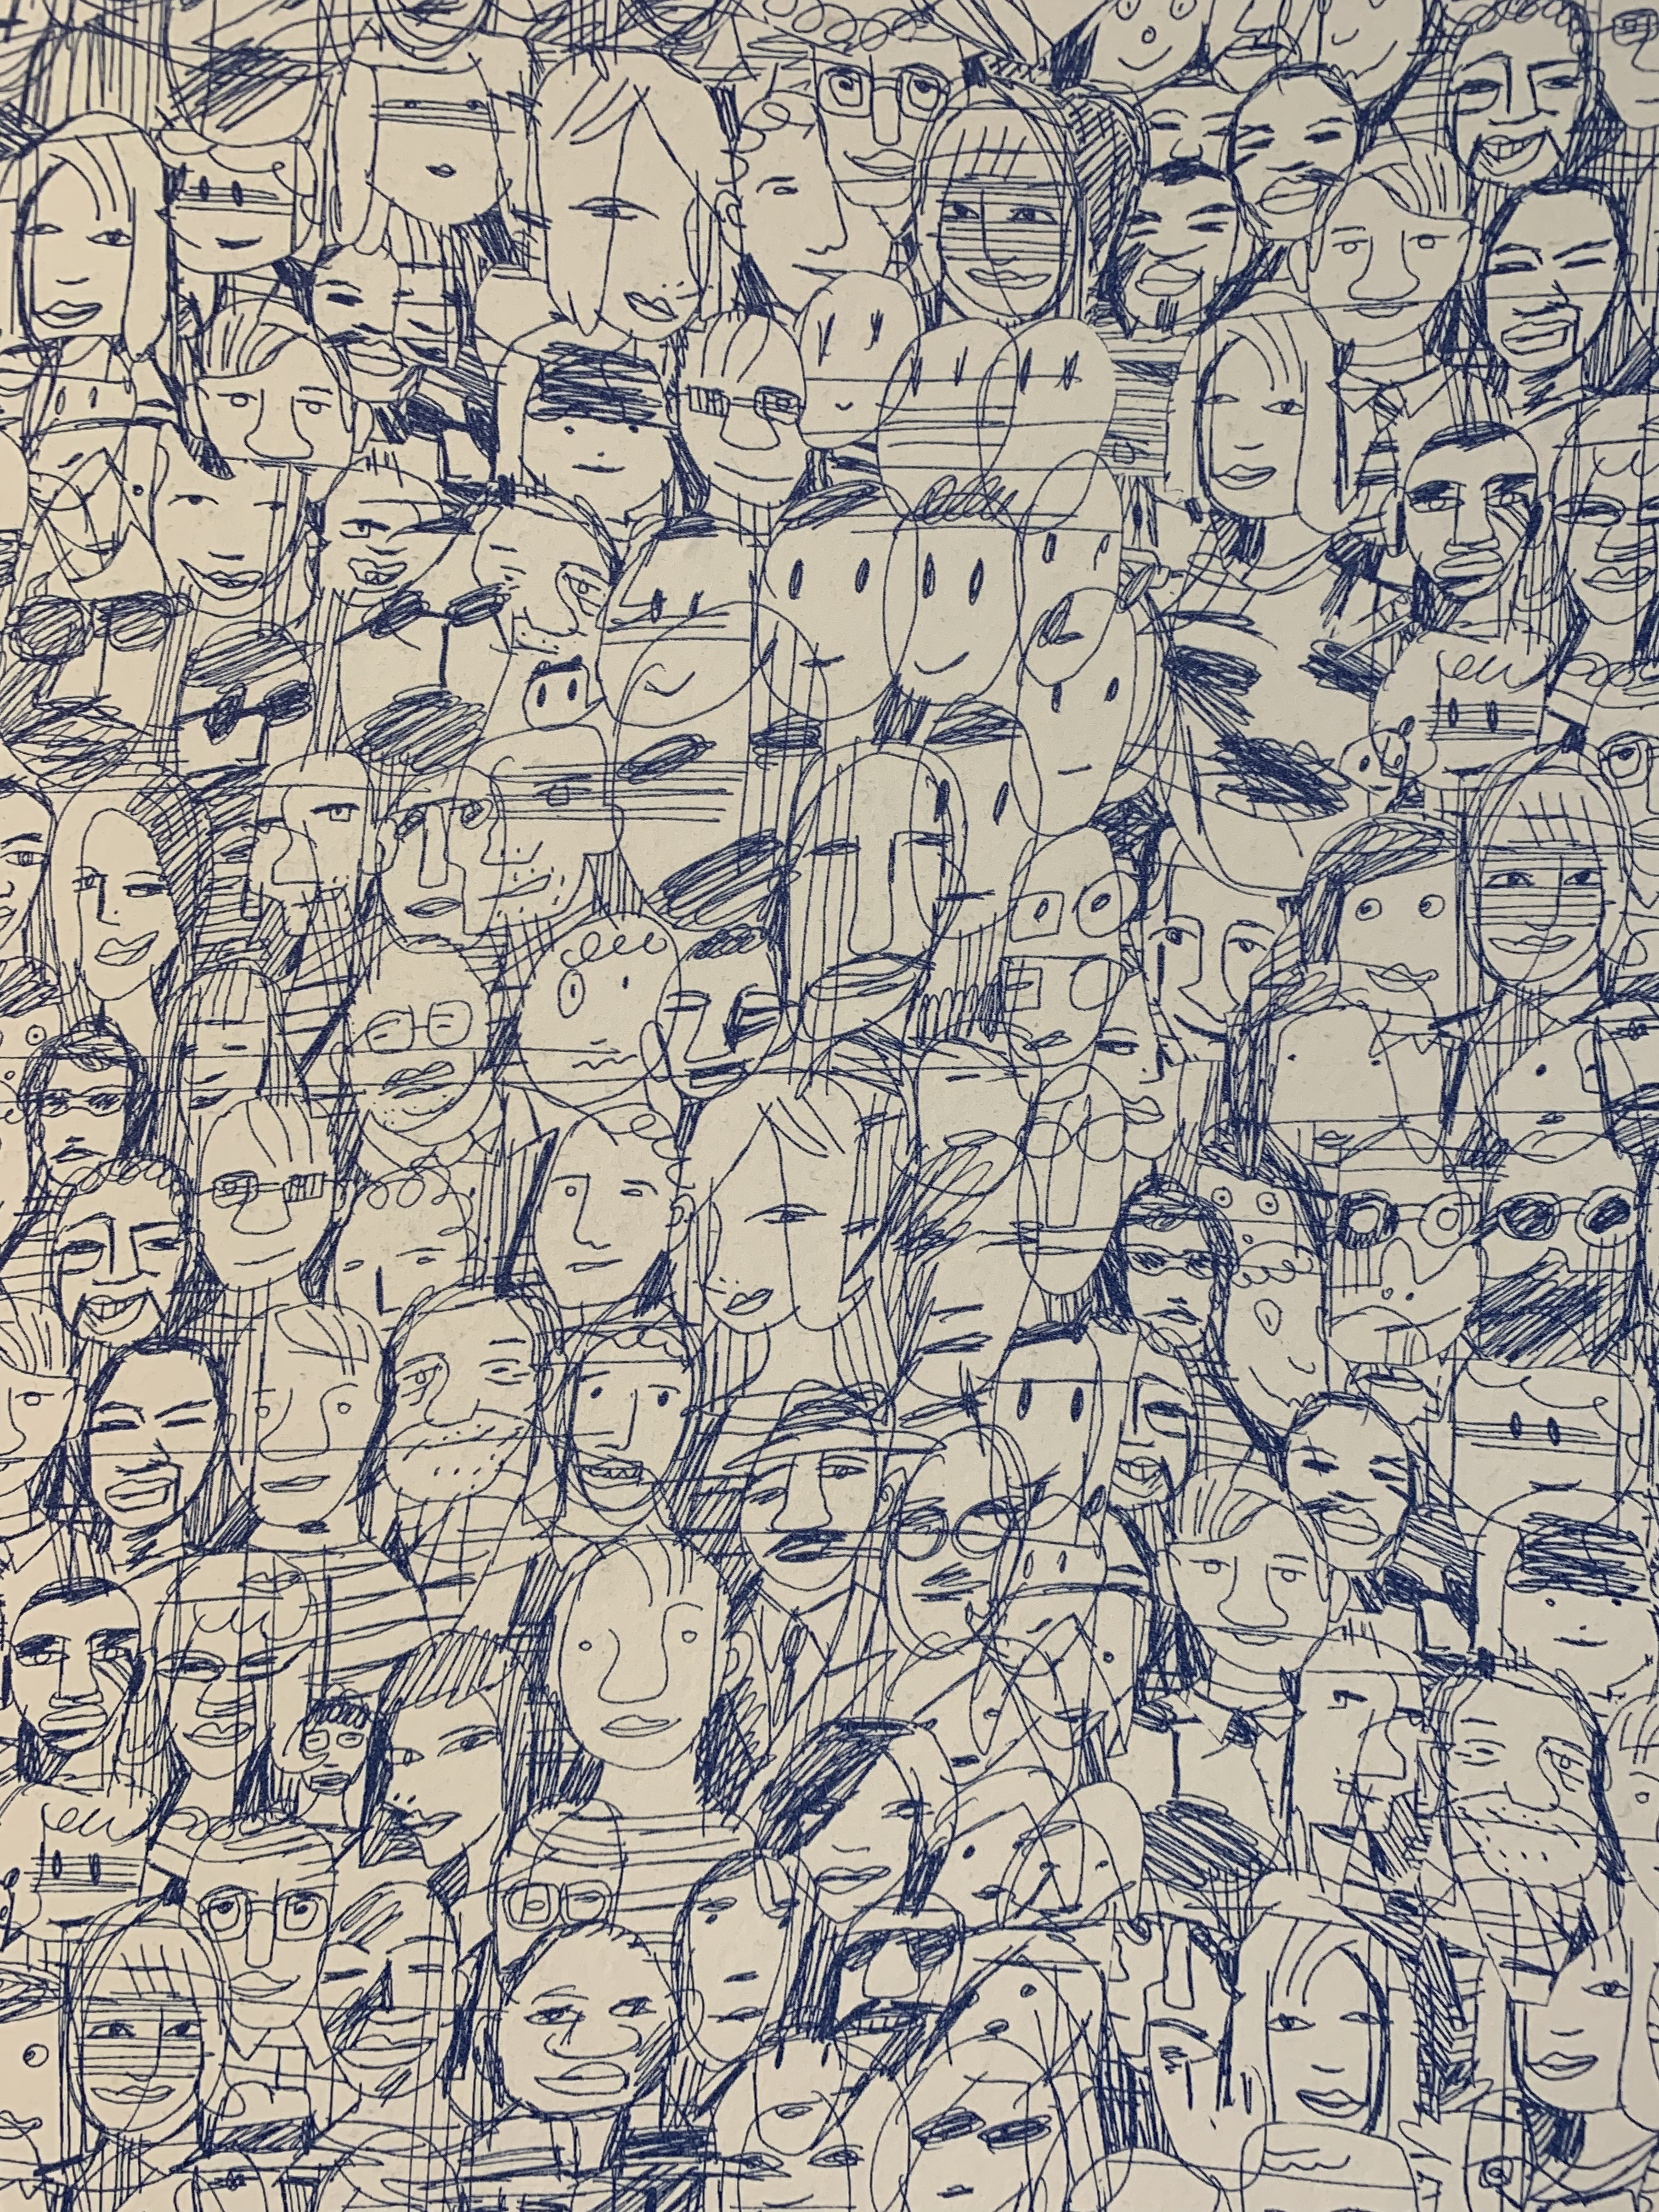 sketch of human faces drawn in ink